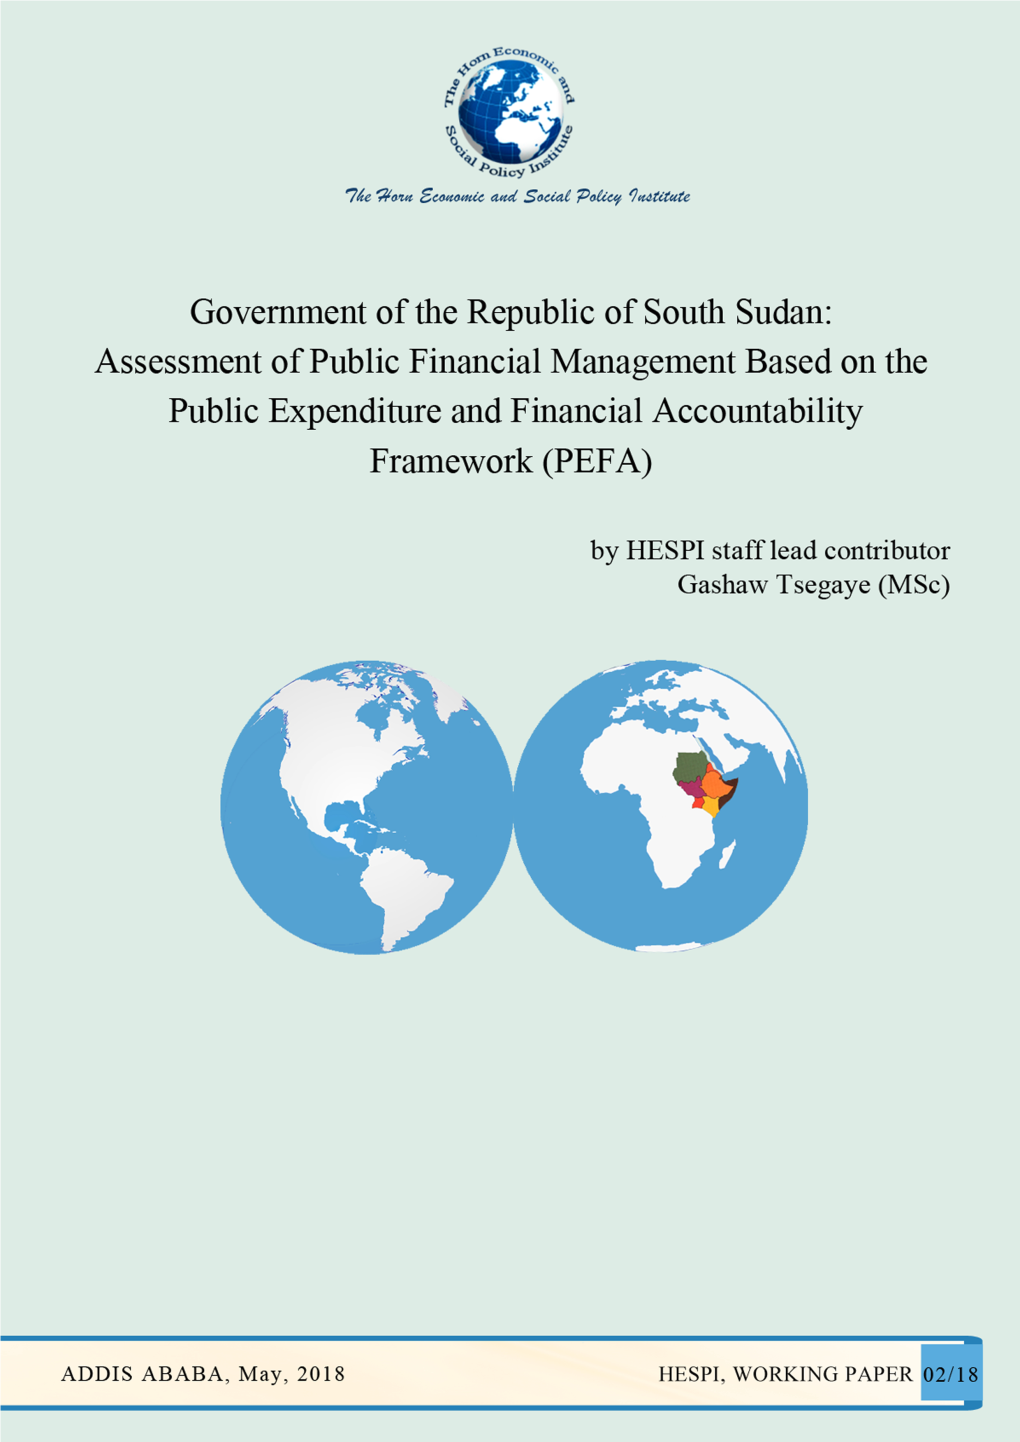 Government of the Republic of South Sudan: Assessment of Public Financial Management Based on the Public Expenditure and Financial Accountability Framework (PEFA)